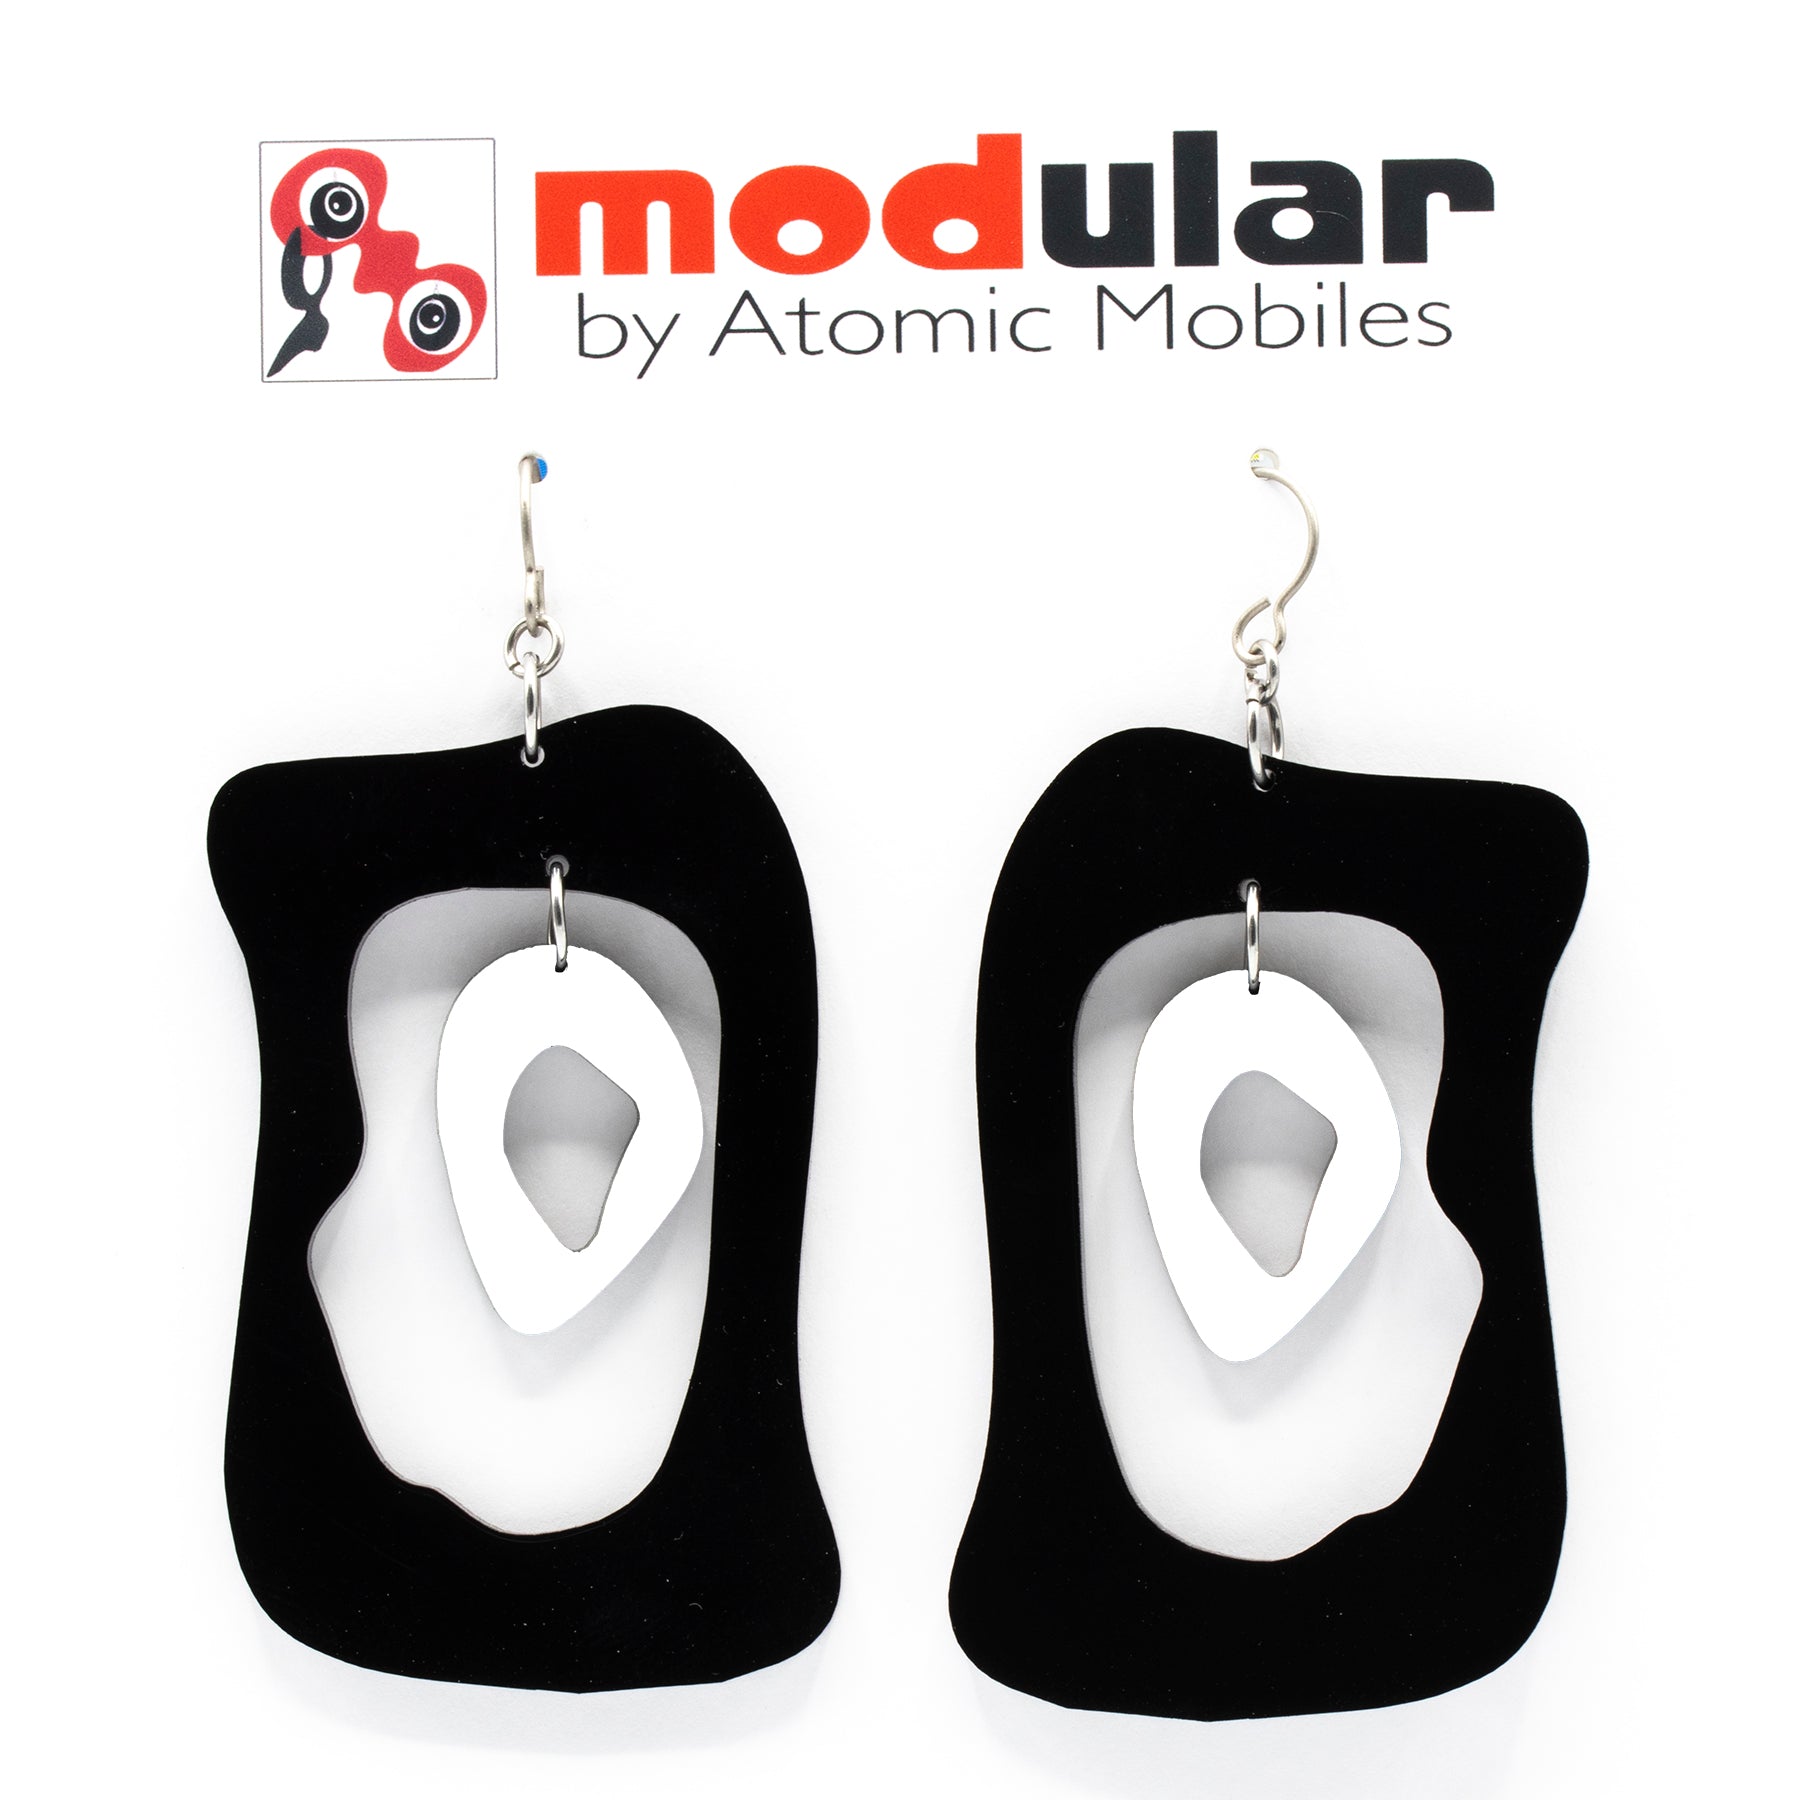 MODular Earrings - Modern Bliss Statement Earrings in Black and White by AtomicMobiles.com - retro era inspired mod handmade jewelry